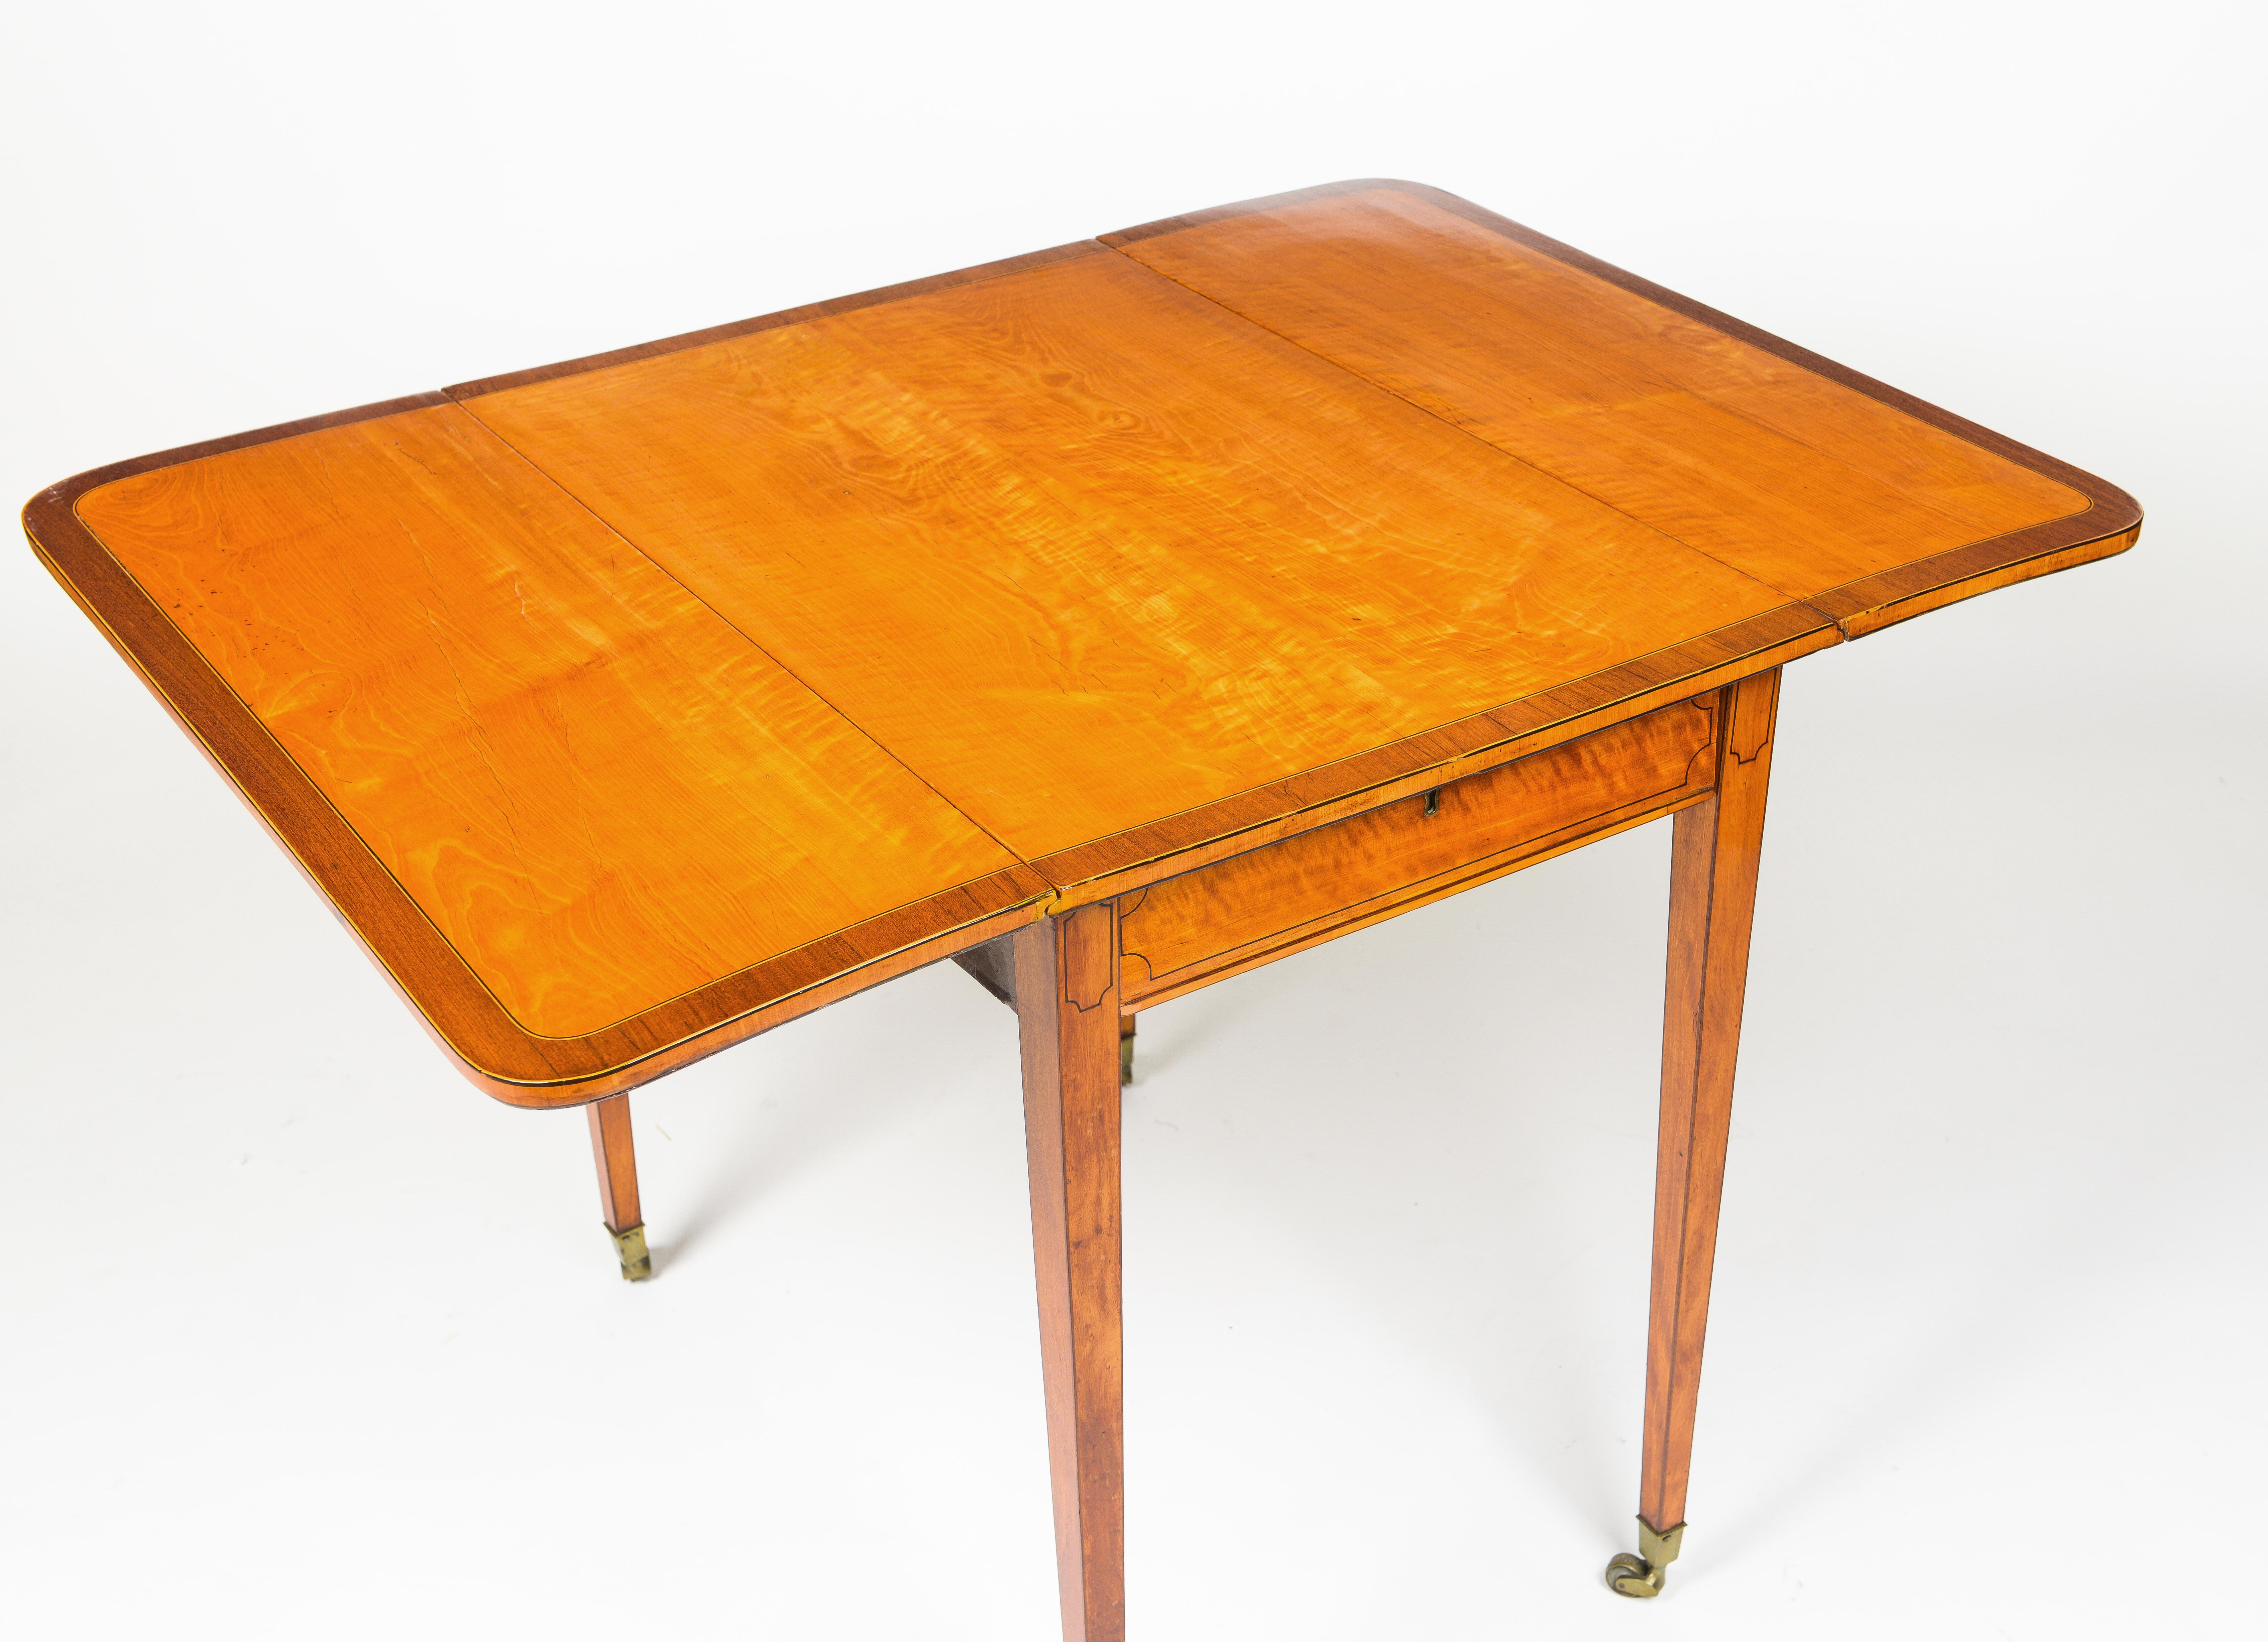 Late 18th Century George III Satinwood and Mahogany Pembroke Table For Sale